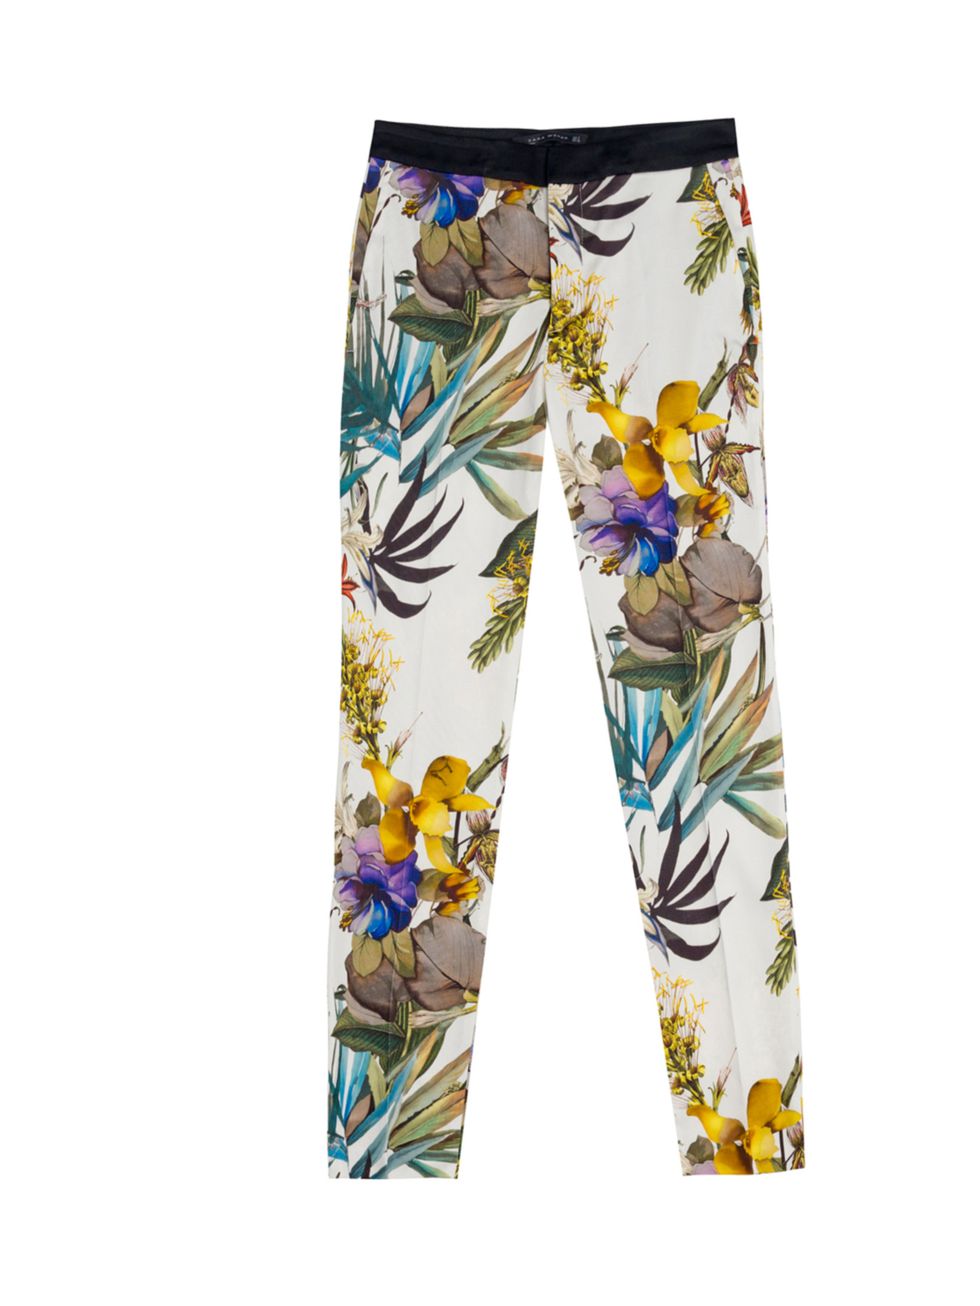 <p><a href="http://www.zara.com/webapp/wcs/stores/servlet/product/uk/en/zara-S2012/189505/776517/PRINTED%2BTROUSERS%2BWITH%2BCONTRASTING%2BWAIST">Zara</a> floral print trousers, £39.99</p>